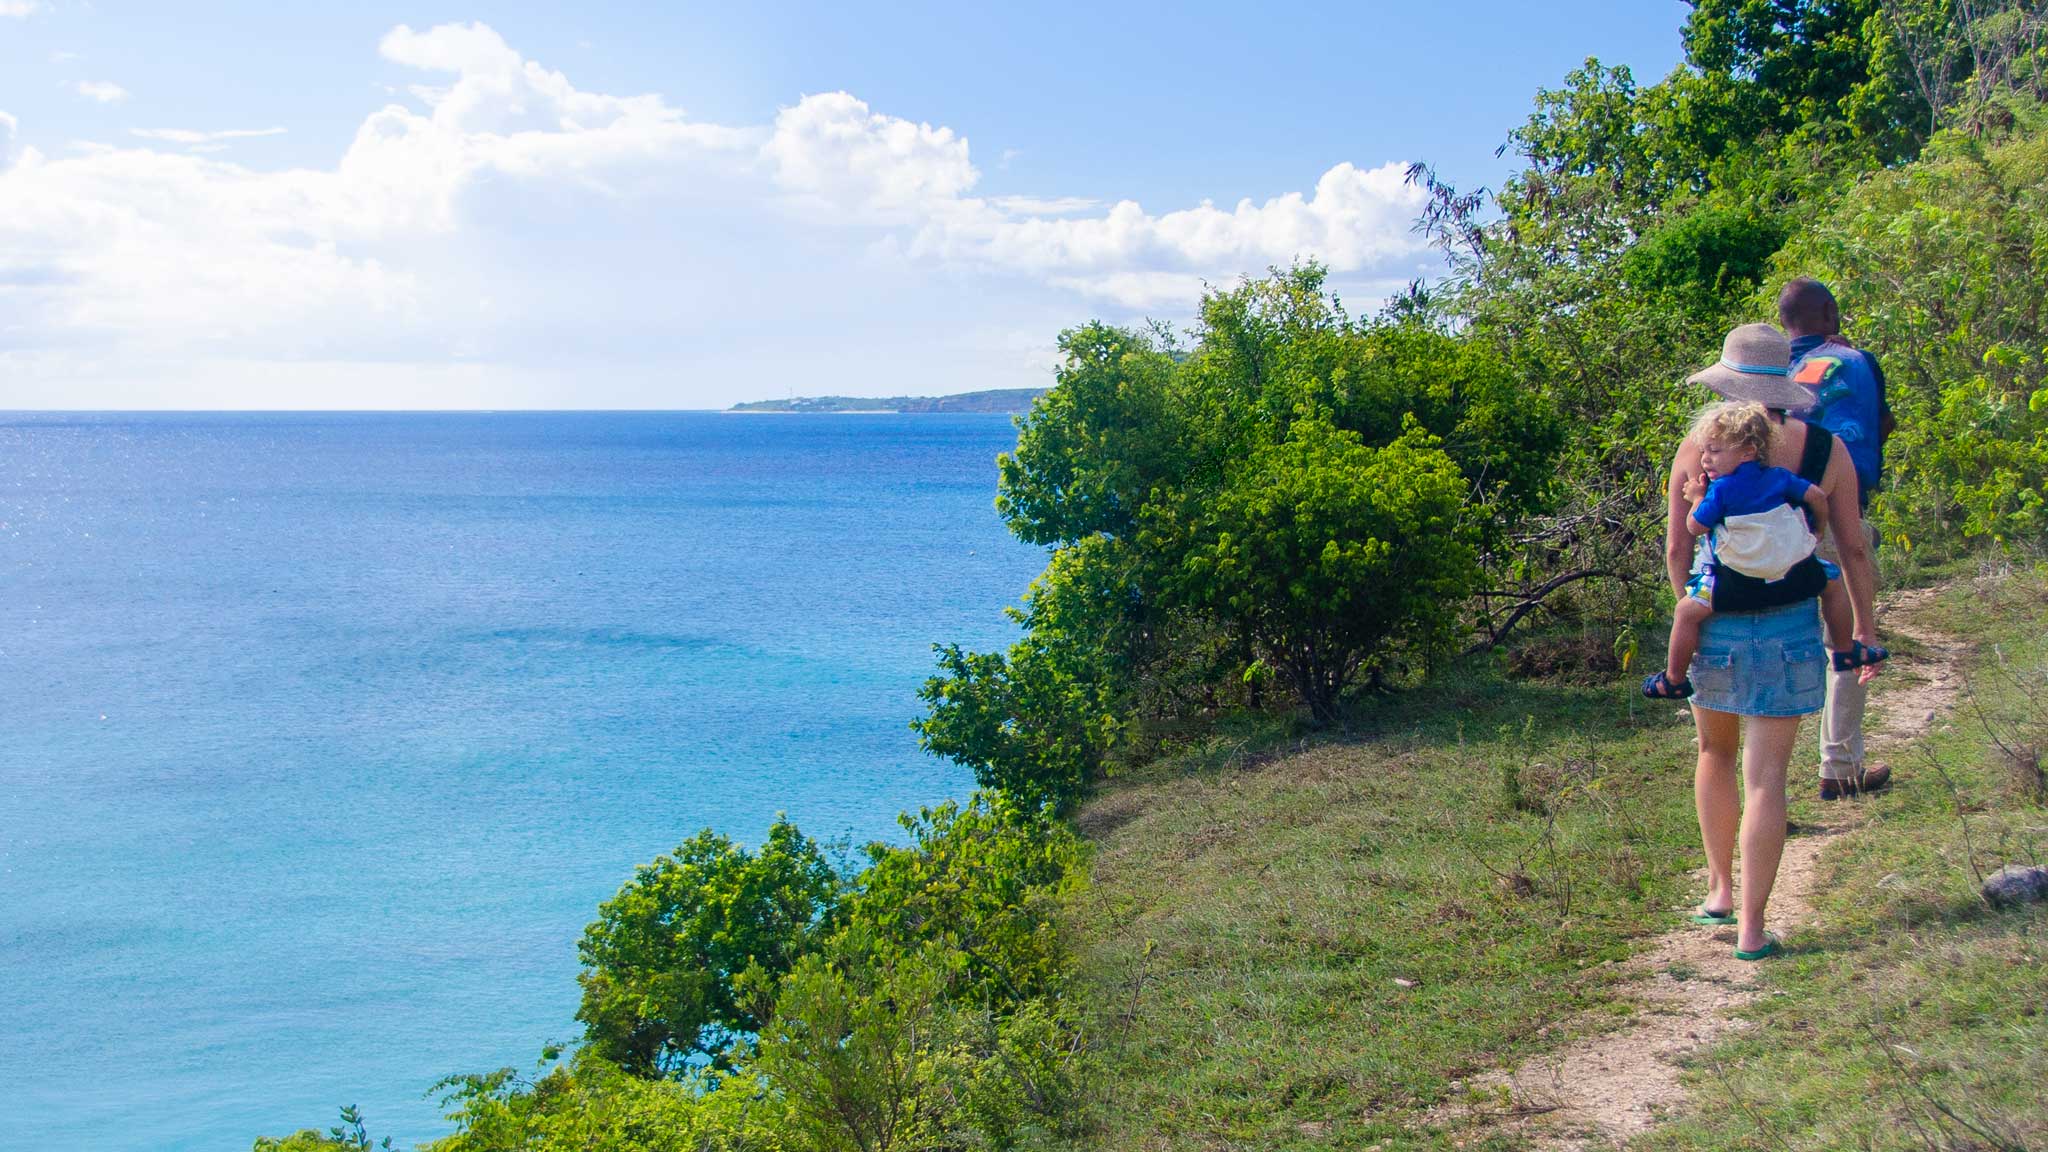 Hiking to Little Bay Anguilla by Patrick Bennett